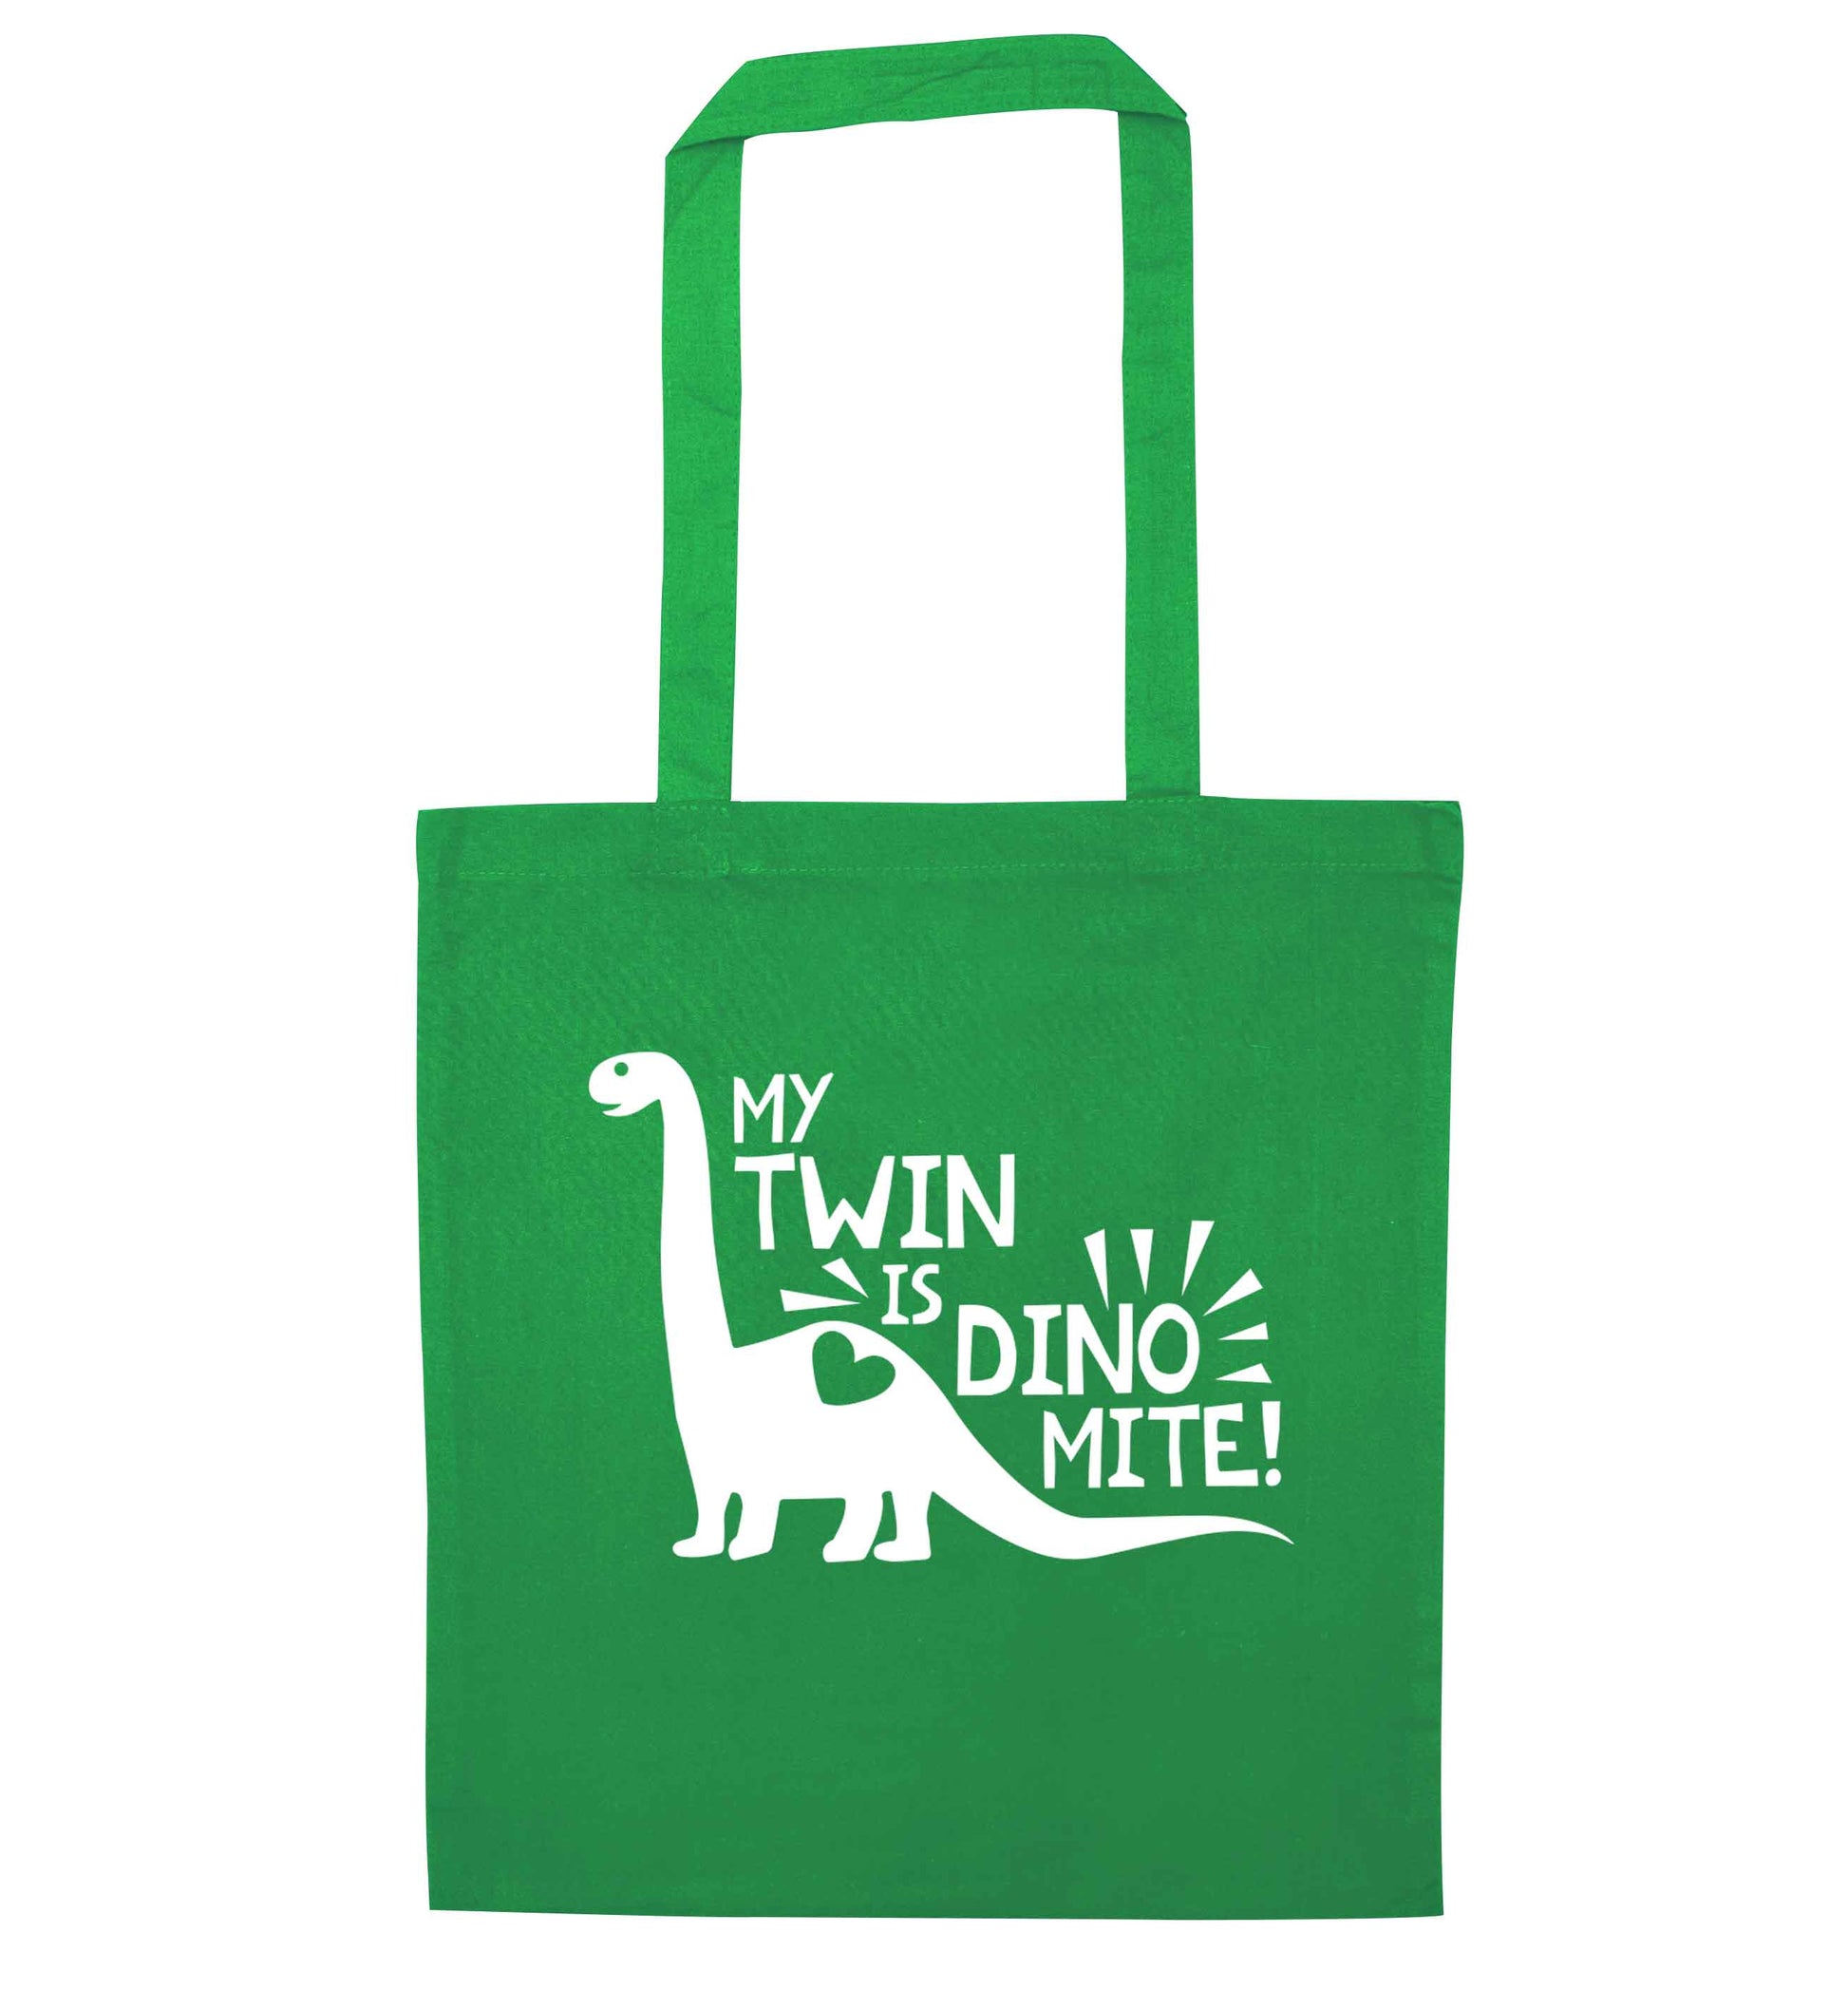 My twin is dinomite! green tote bag